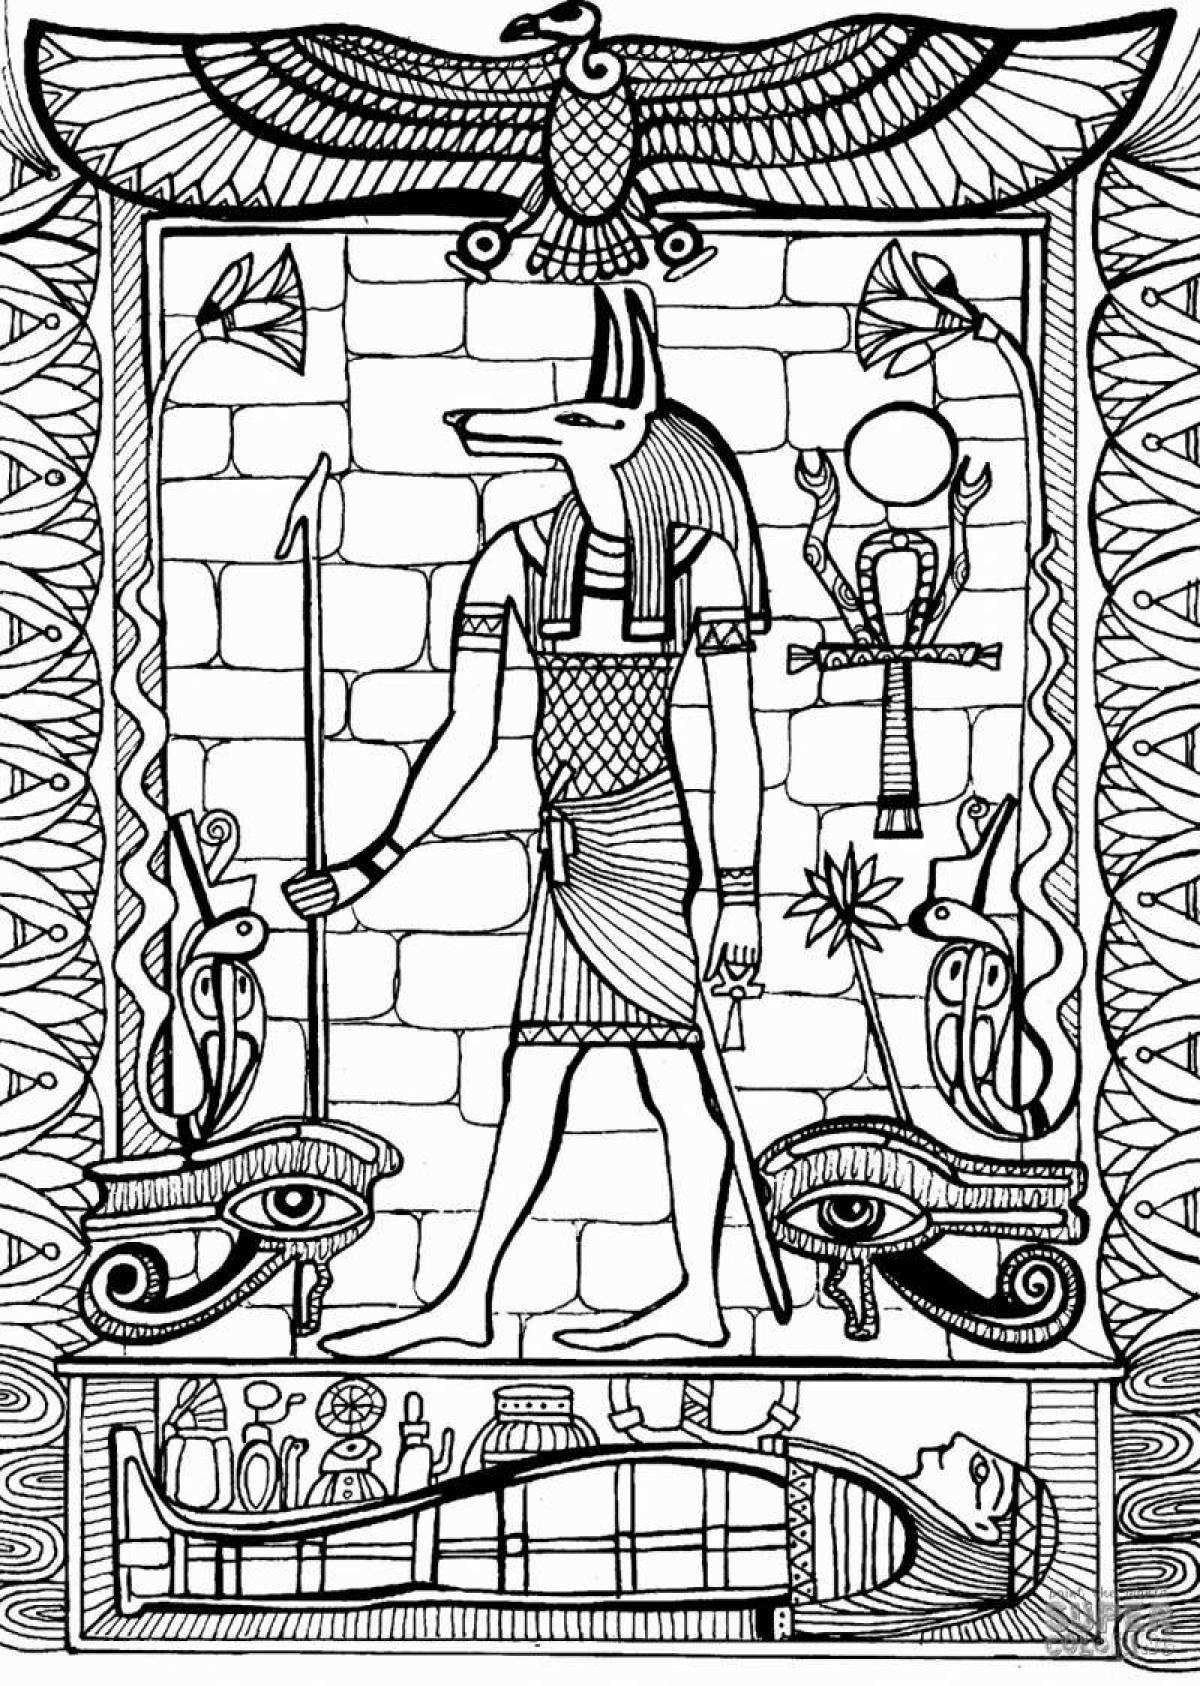 Egyptian gods palace coloring book